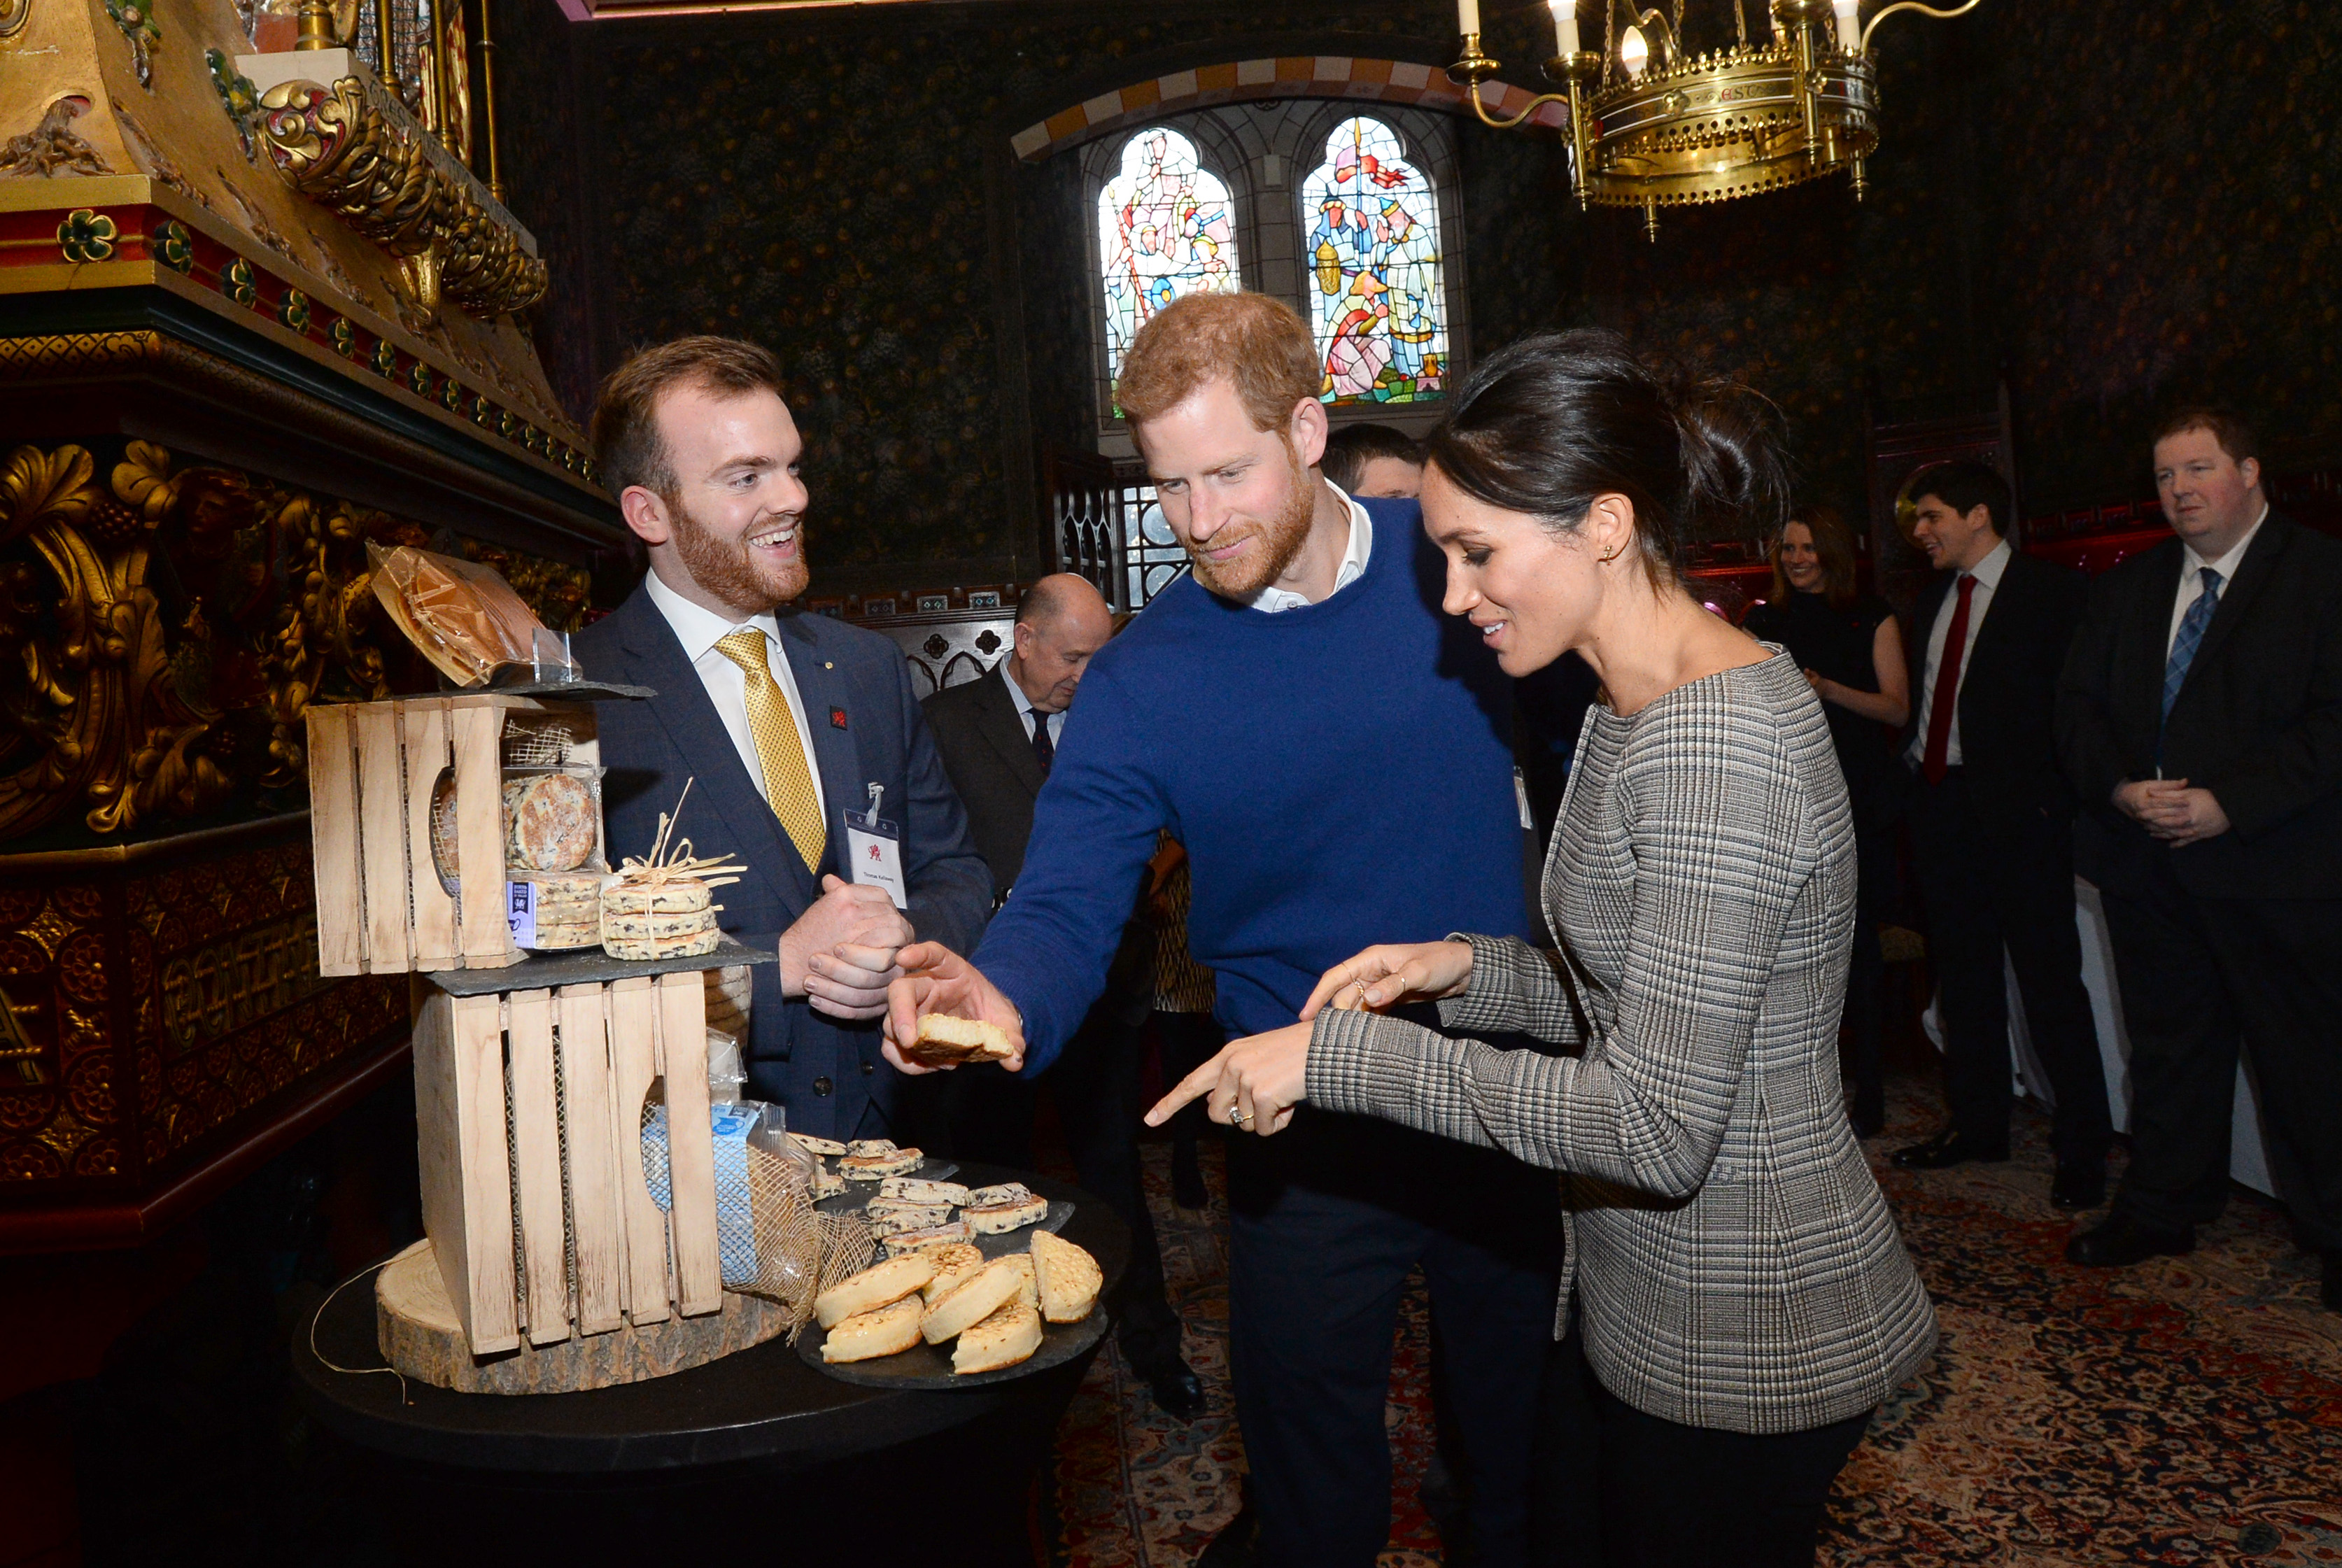 Prince Harry and Meghan Markle enjoy a taste of Wales made in Wrexham